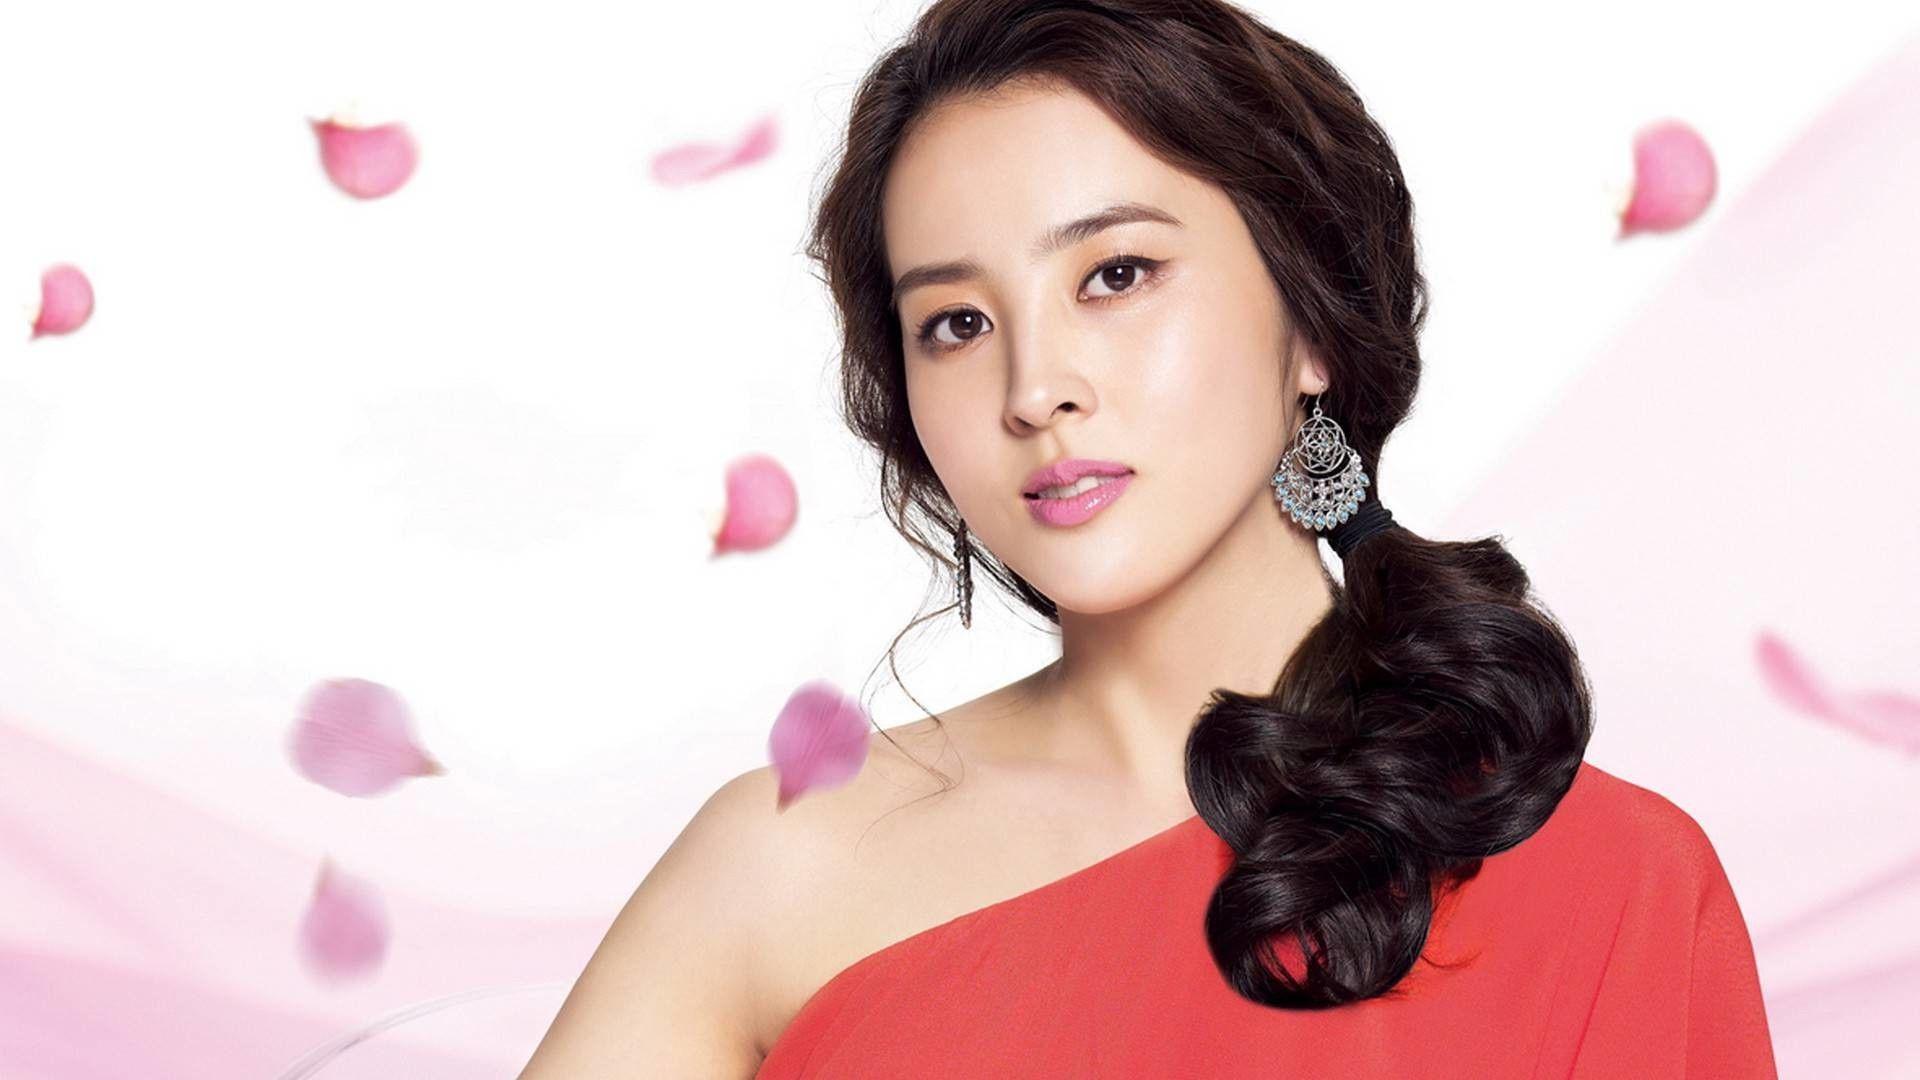 Han Hye Jin Wallpaper High Resolution and Quality Download